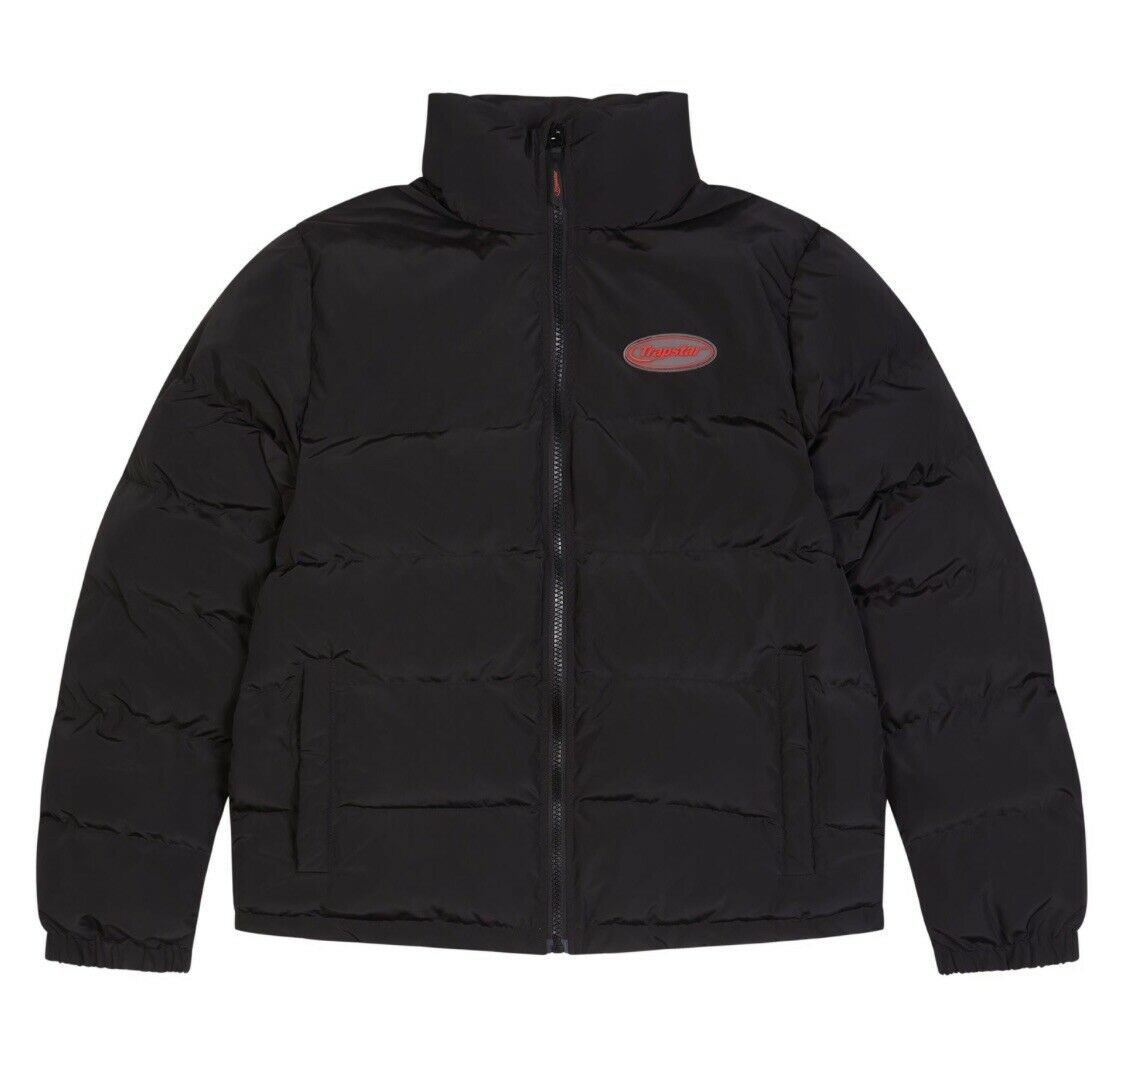 Trapstar Hyperdrive Puffer Jacket Black and Red